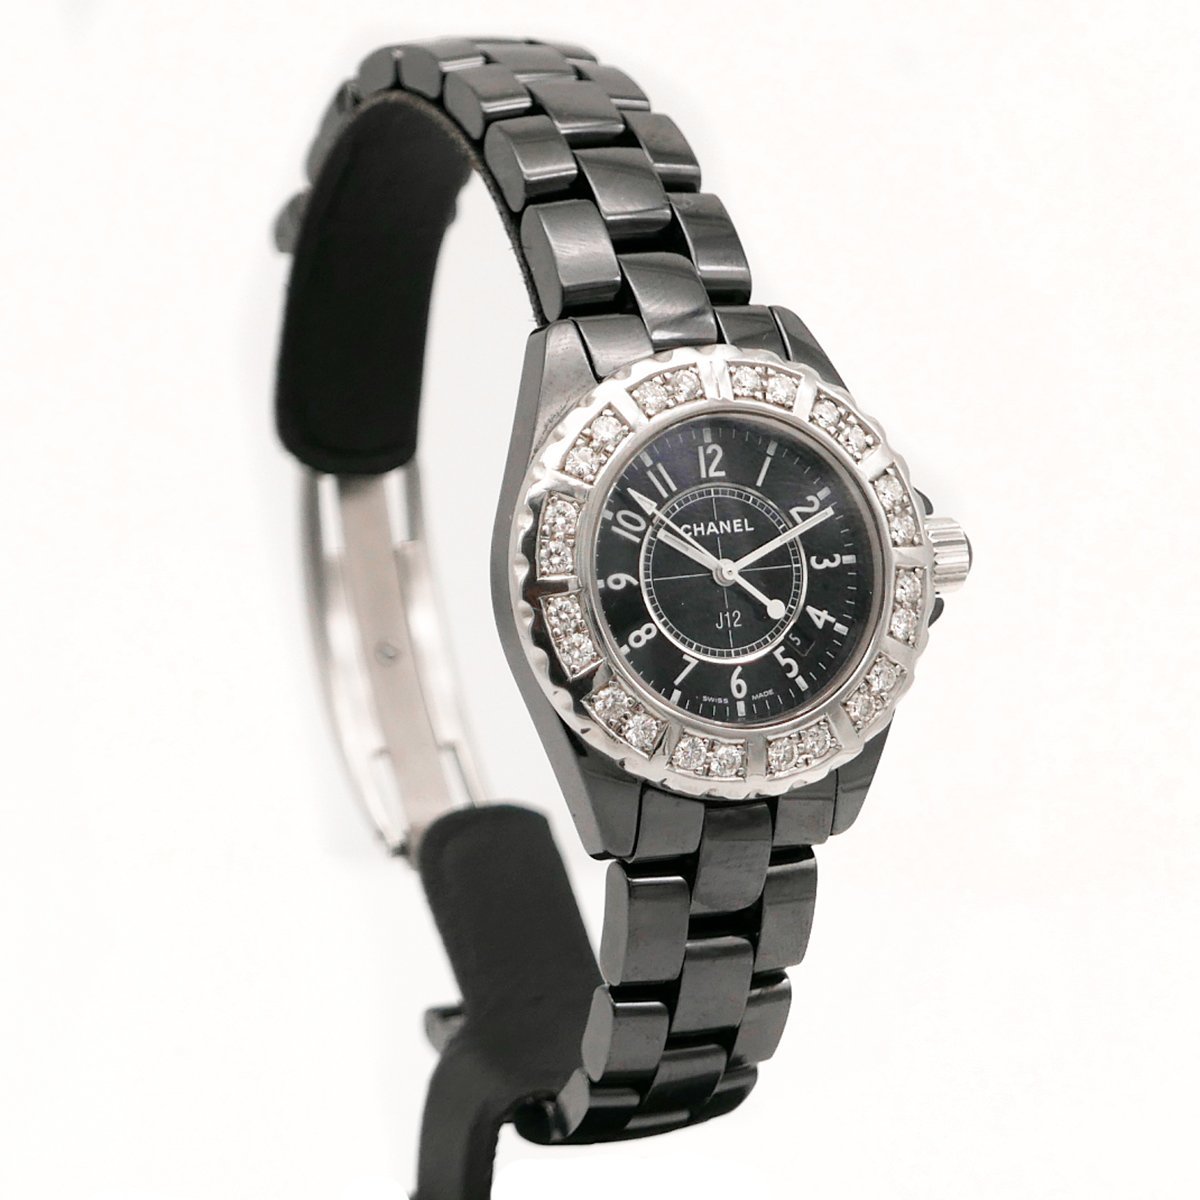  first come, first served *CHANEL Chanel J12 black 33mm* gorgeous Large diamond bezel black 41mm natural diamond 